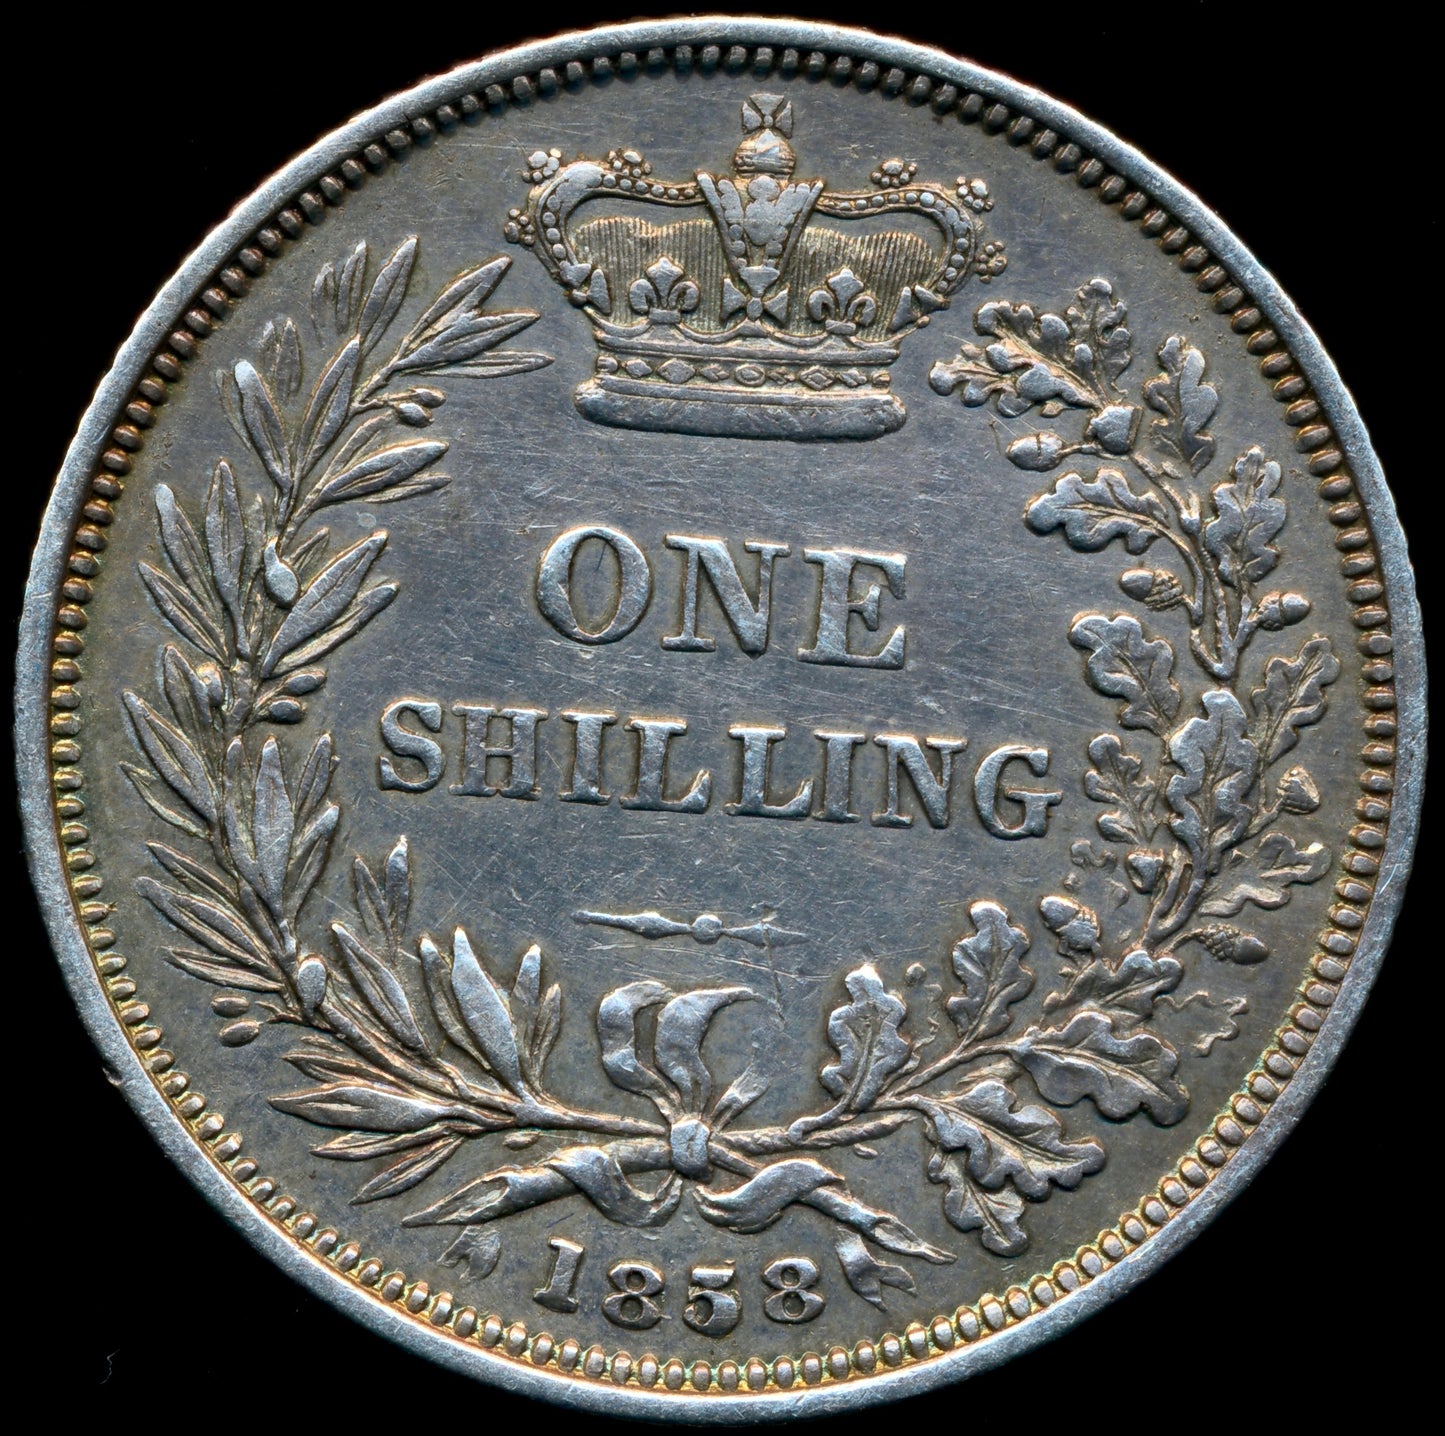 1858/58 Shilling Second young head S3904 ESC 3013 Excessively rare (R4) VF